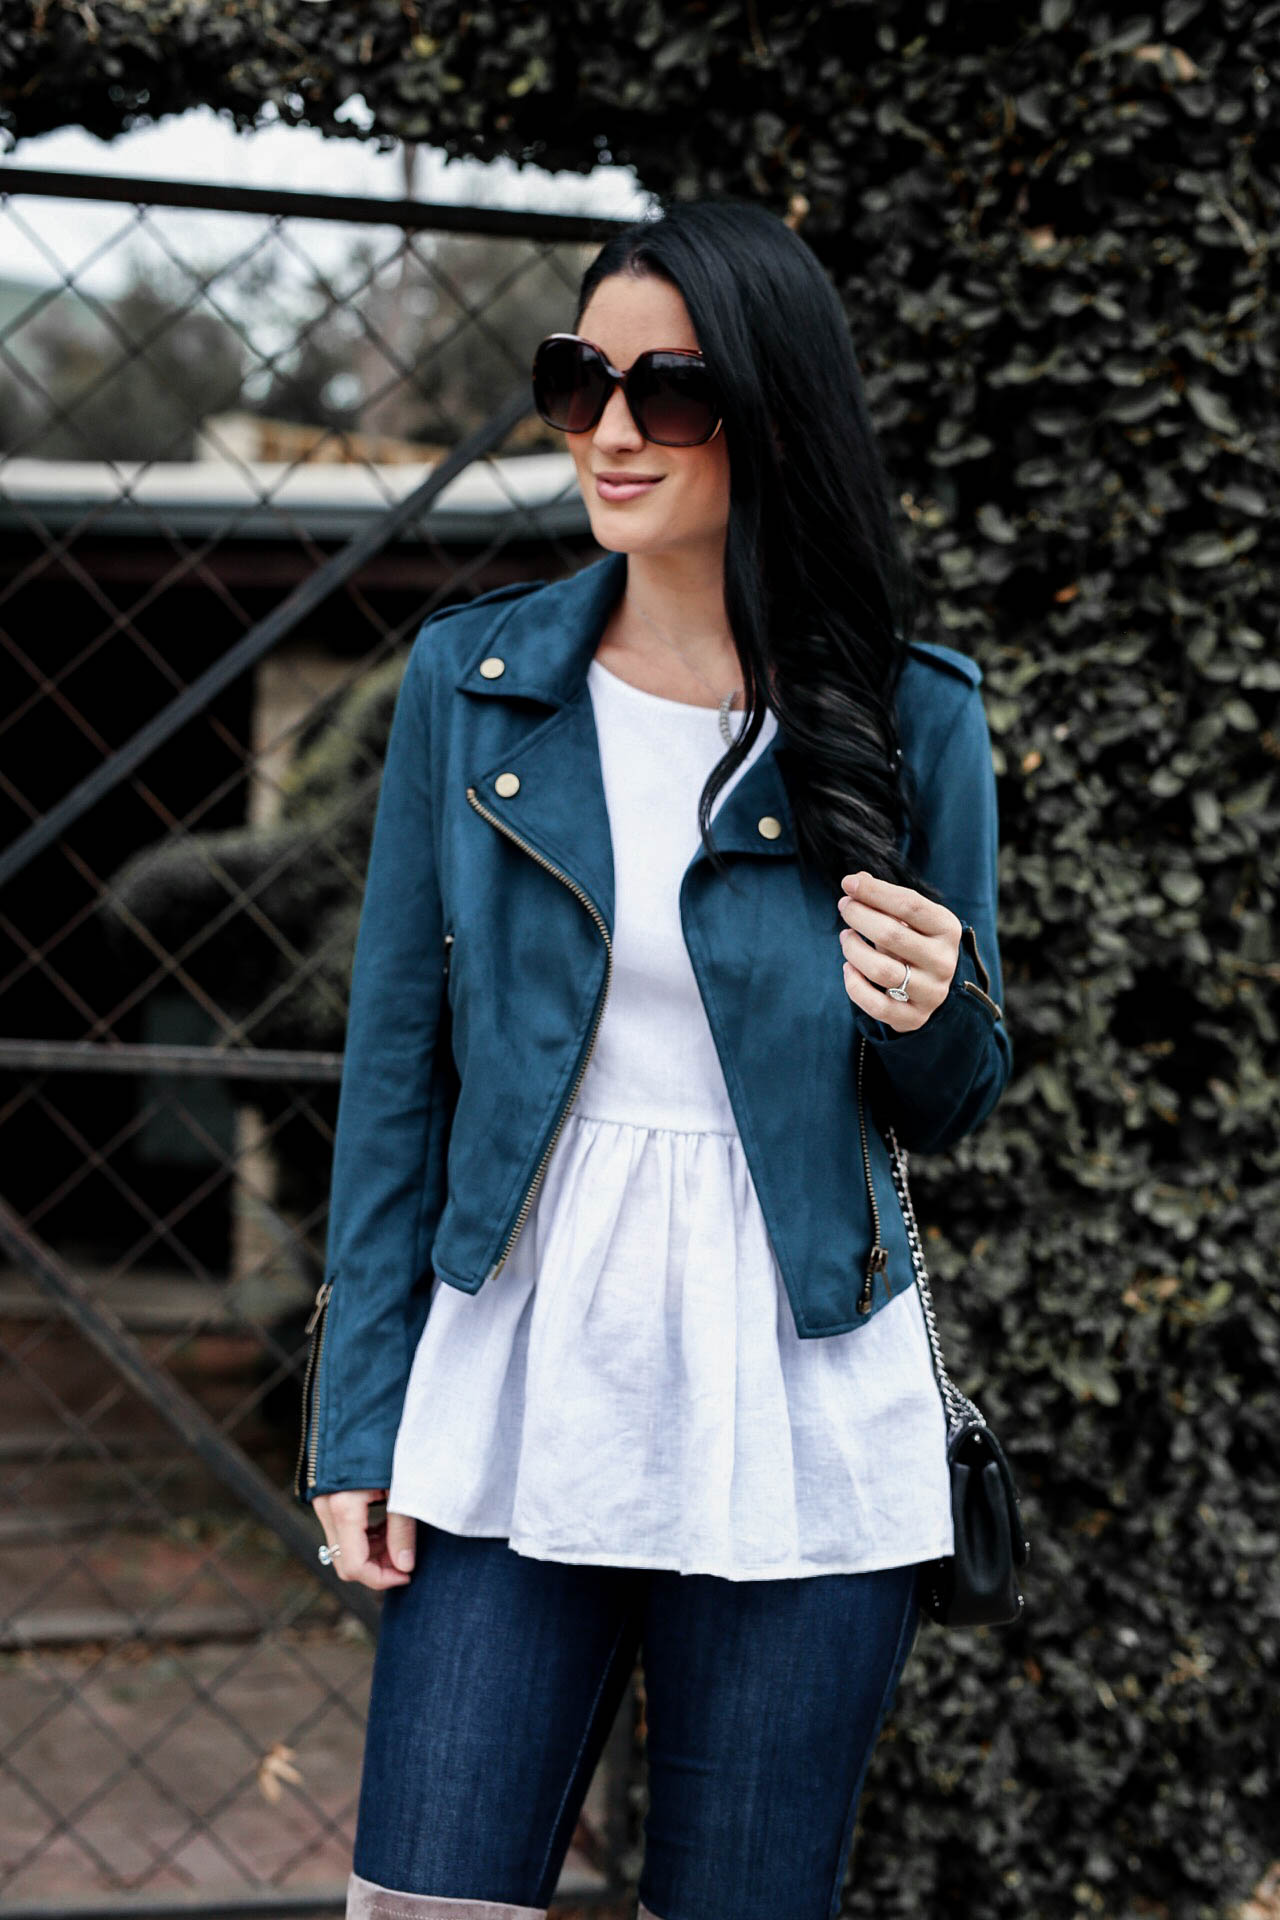 Teal Moto Jacket by popular Austin style blogger Dressed to Kill | Teal Moto Jacket | Must Have Transitional Moto Jackets | moto jacket outfit ideas | how to style a Moto jacket | Moto jackets for women || Dressed to Kill #motojacket #transitionalstyle #winteroutfits